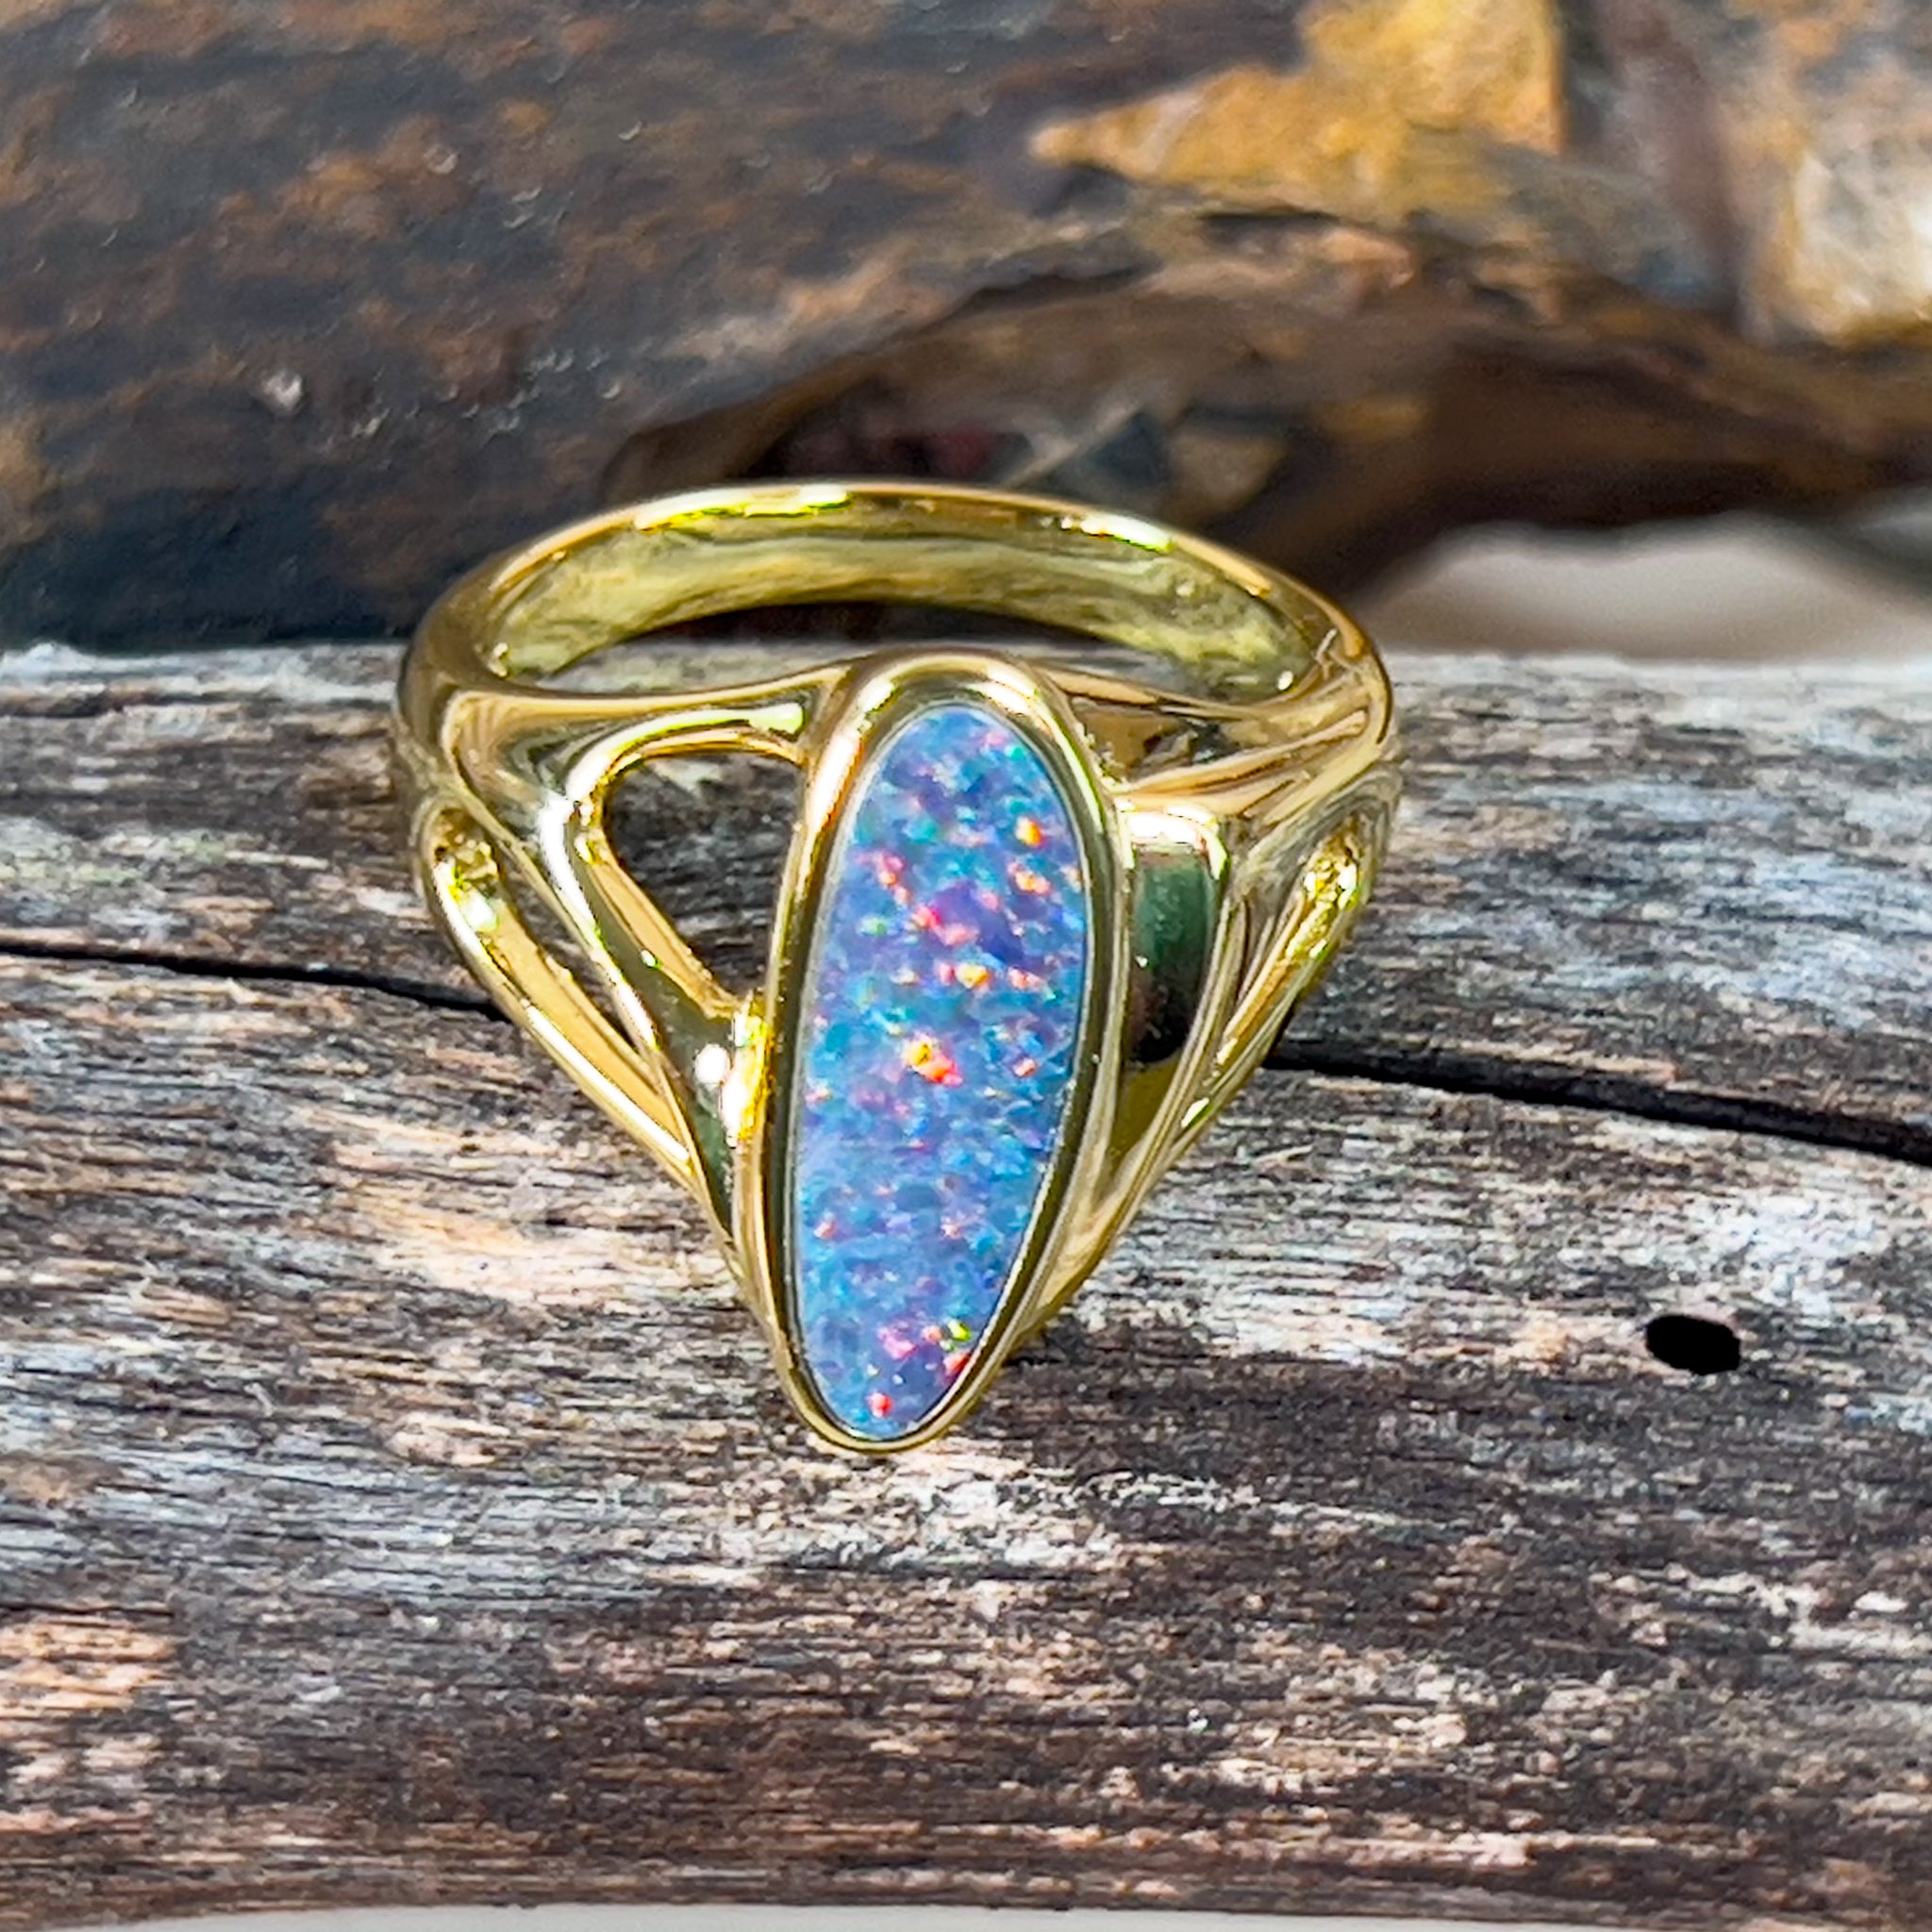 Sterling Silver Gold plated cut out patterned Opal doublet ring - Masterpiece Jewellery Opal & Gems Sydney Australia | Online Shop